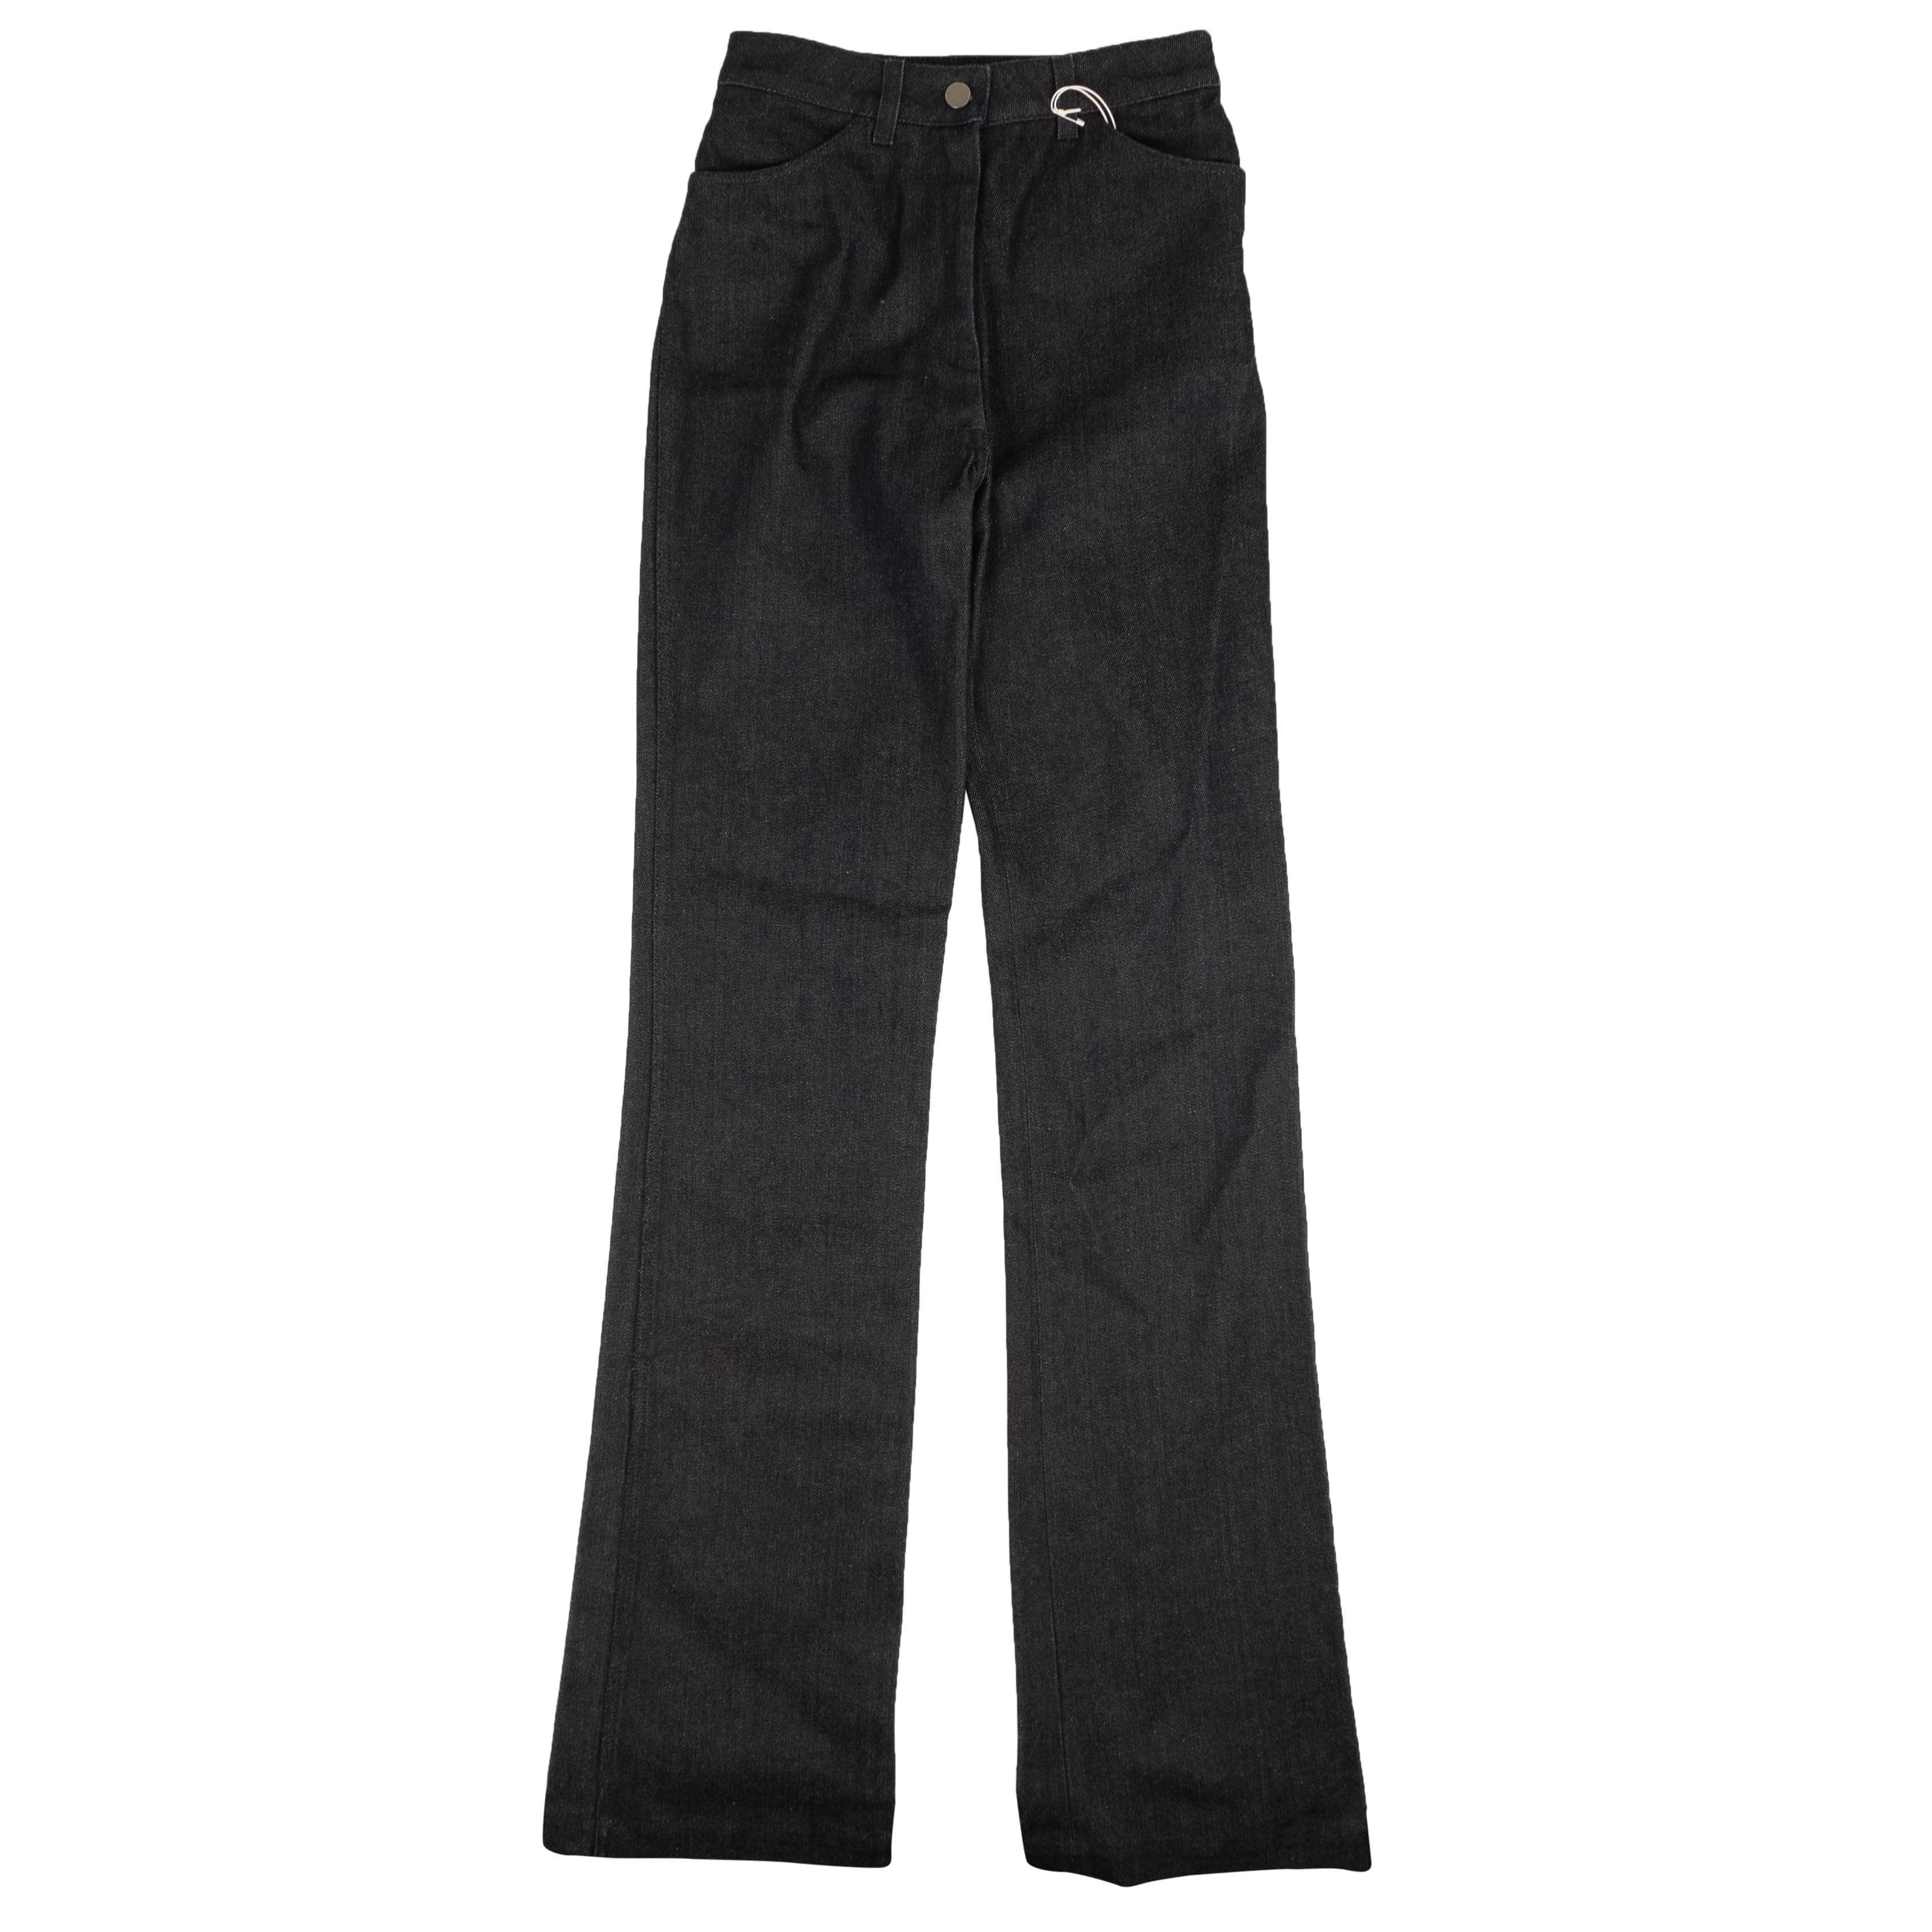 A_Plan_Application a_plan_application, channelenable-all, chicmi, couponcollection, gender-womens, main-clothing, size-27, under-250, womens-flared-jeans 27 Black Cotton Denim Jeans 74NGG-AP-1042/27 74NGG-AP-1042/27